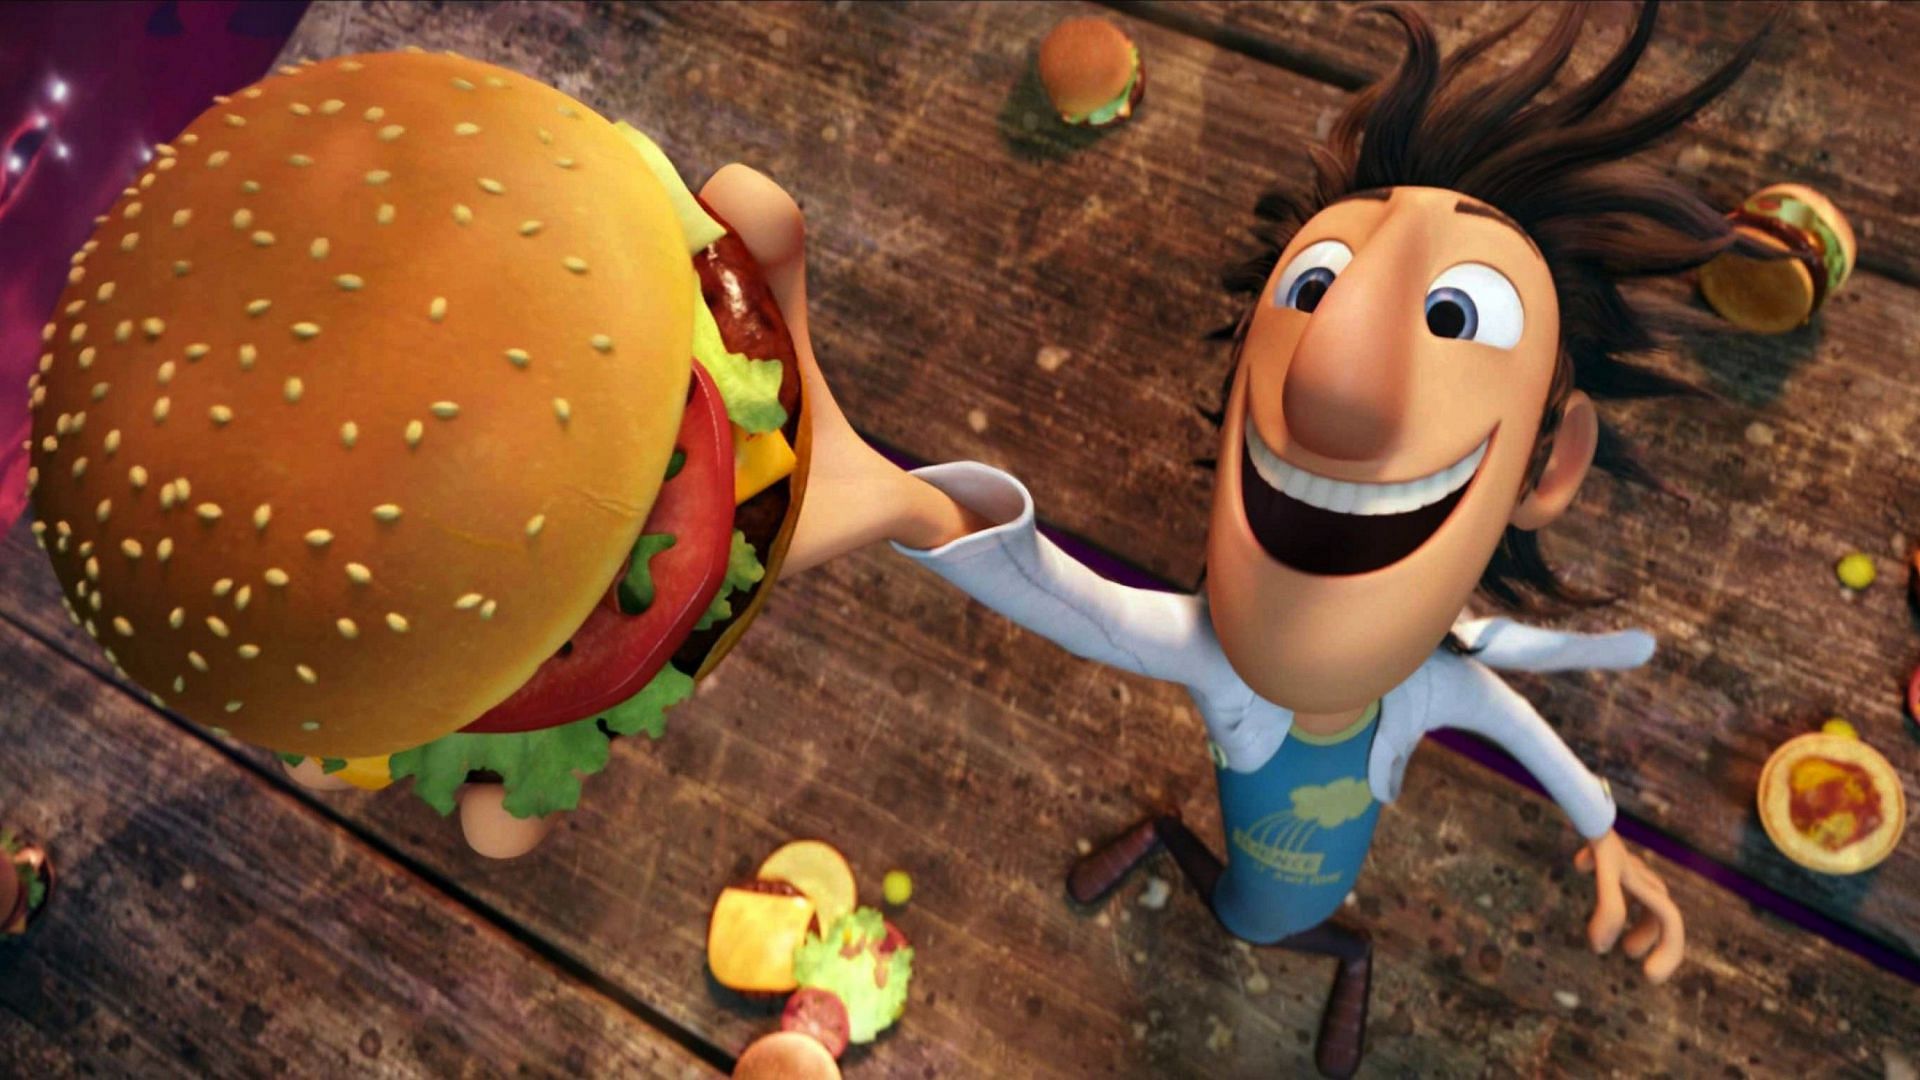 Flint Lockwood in Cloudy with a Chance of Meatballs (Image via Sony)